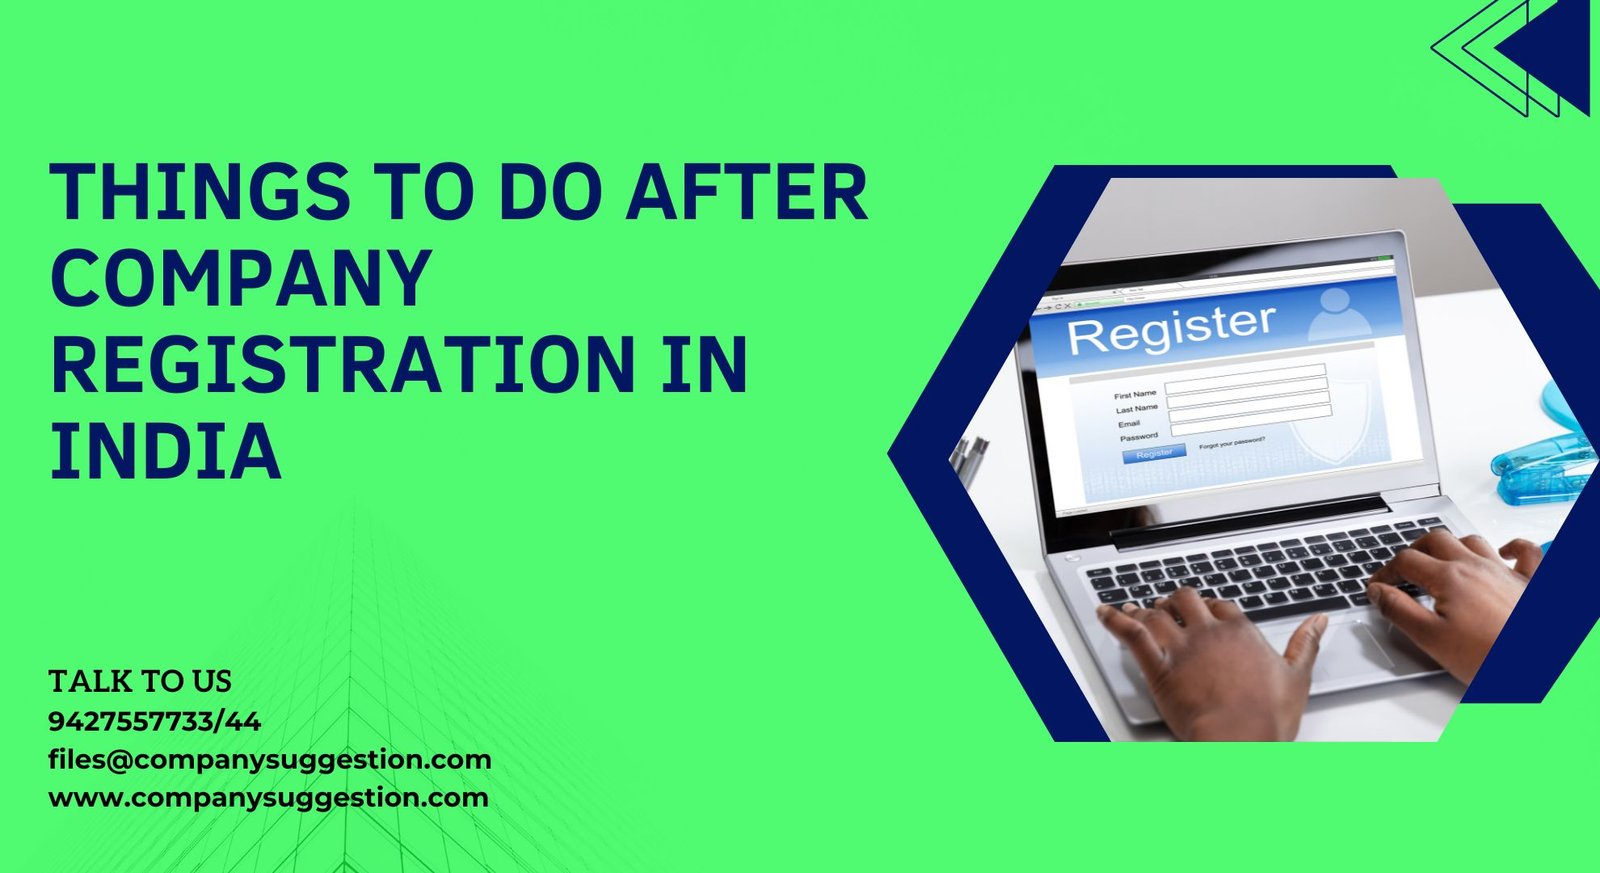 Things to do after Company Registration in India